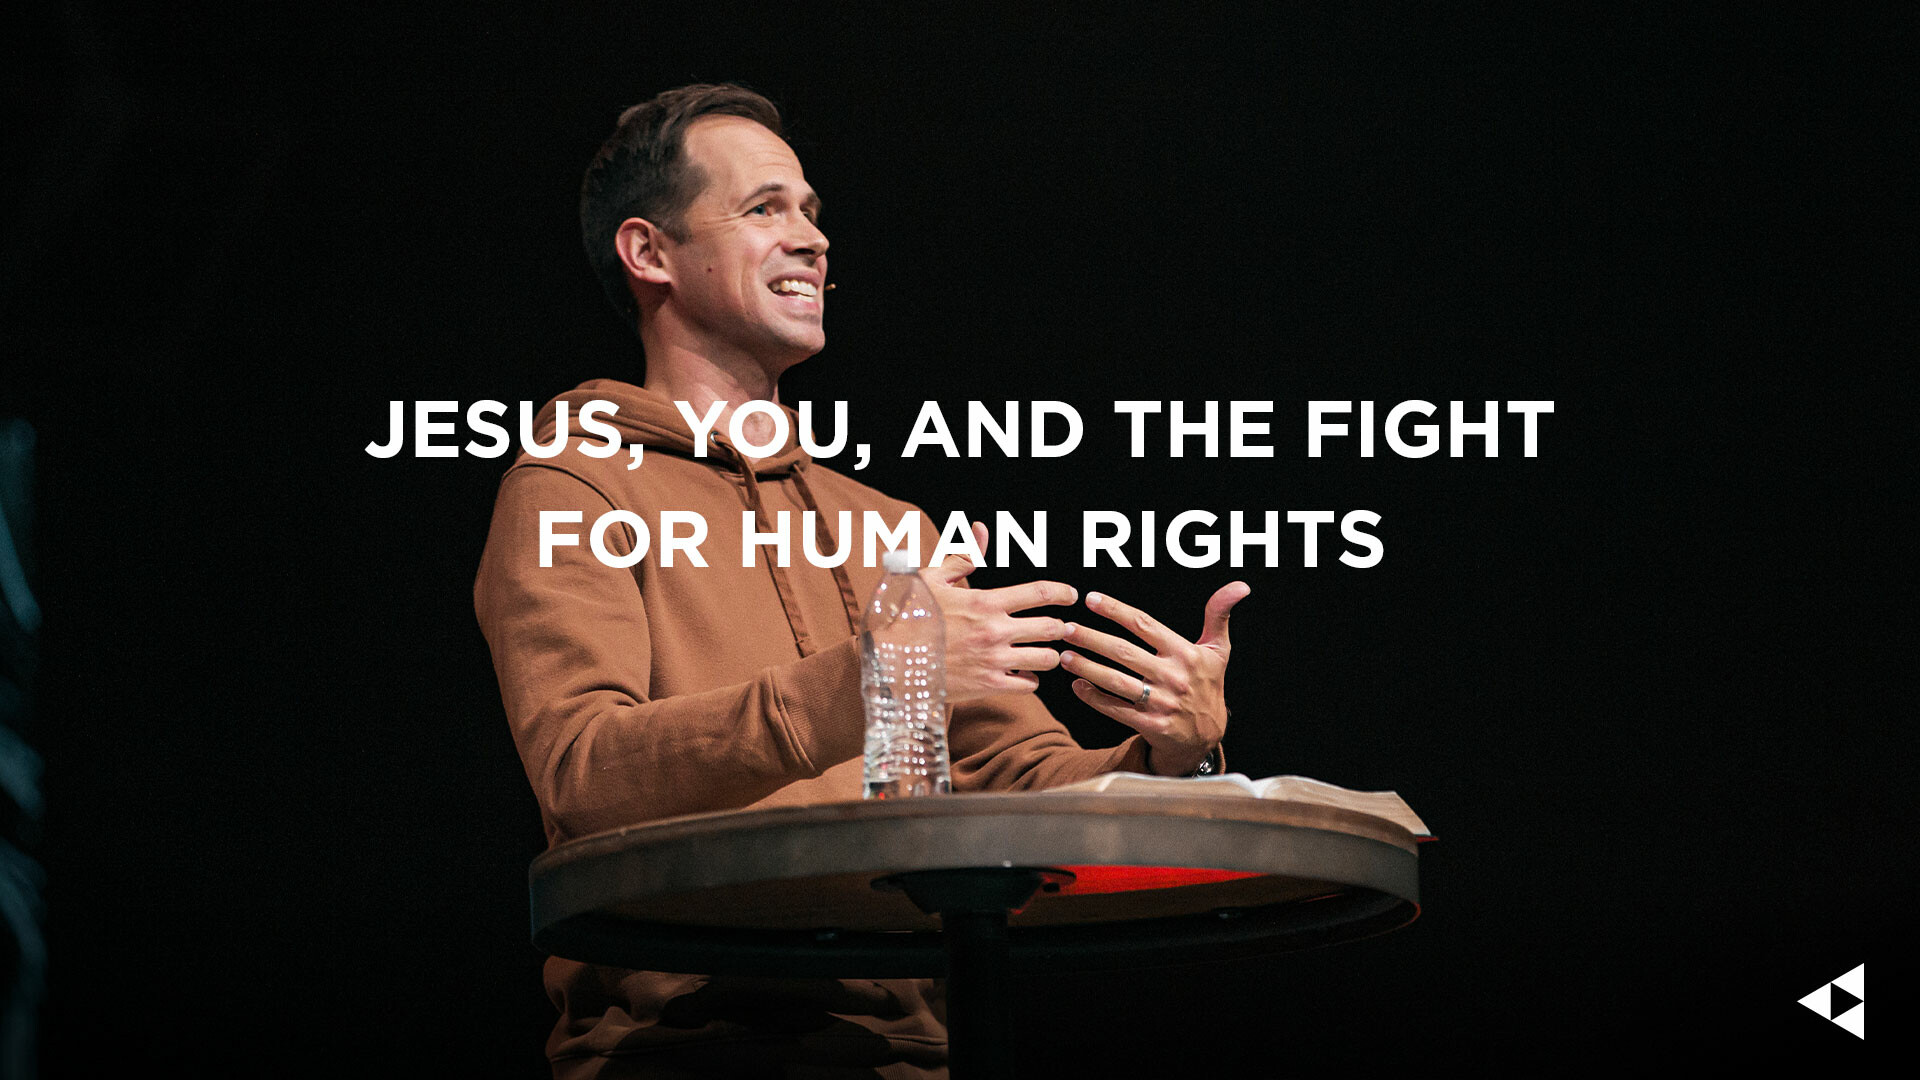 View Message: Jesus, You, and the Fight for Human Rights